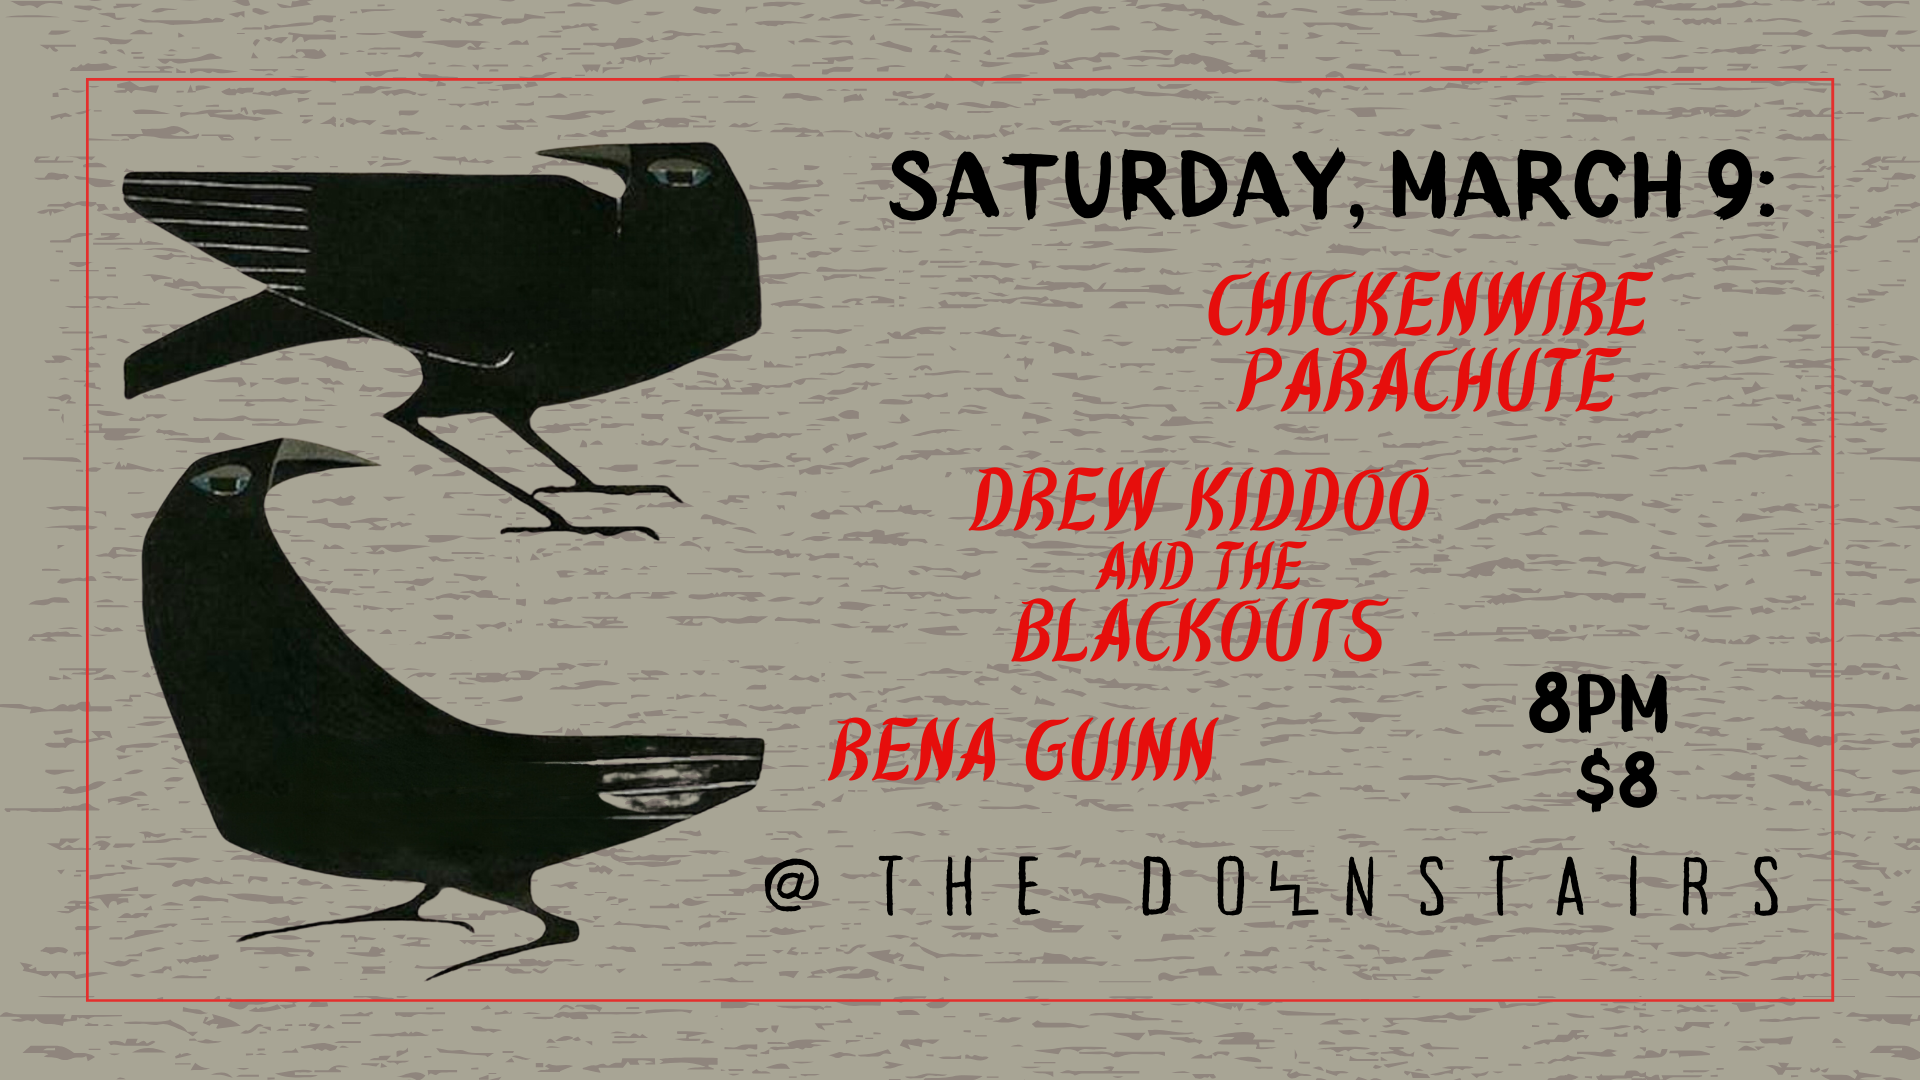 Chickenwire Parachute / Drew Kiddoo and The Blackouts / Rena Guinn 